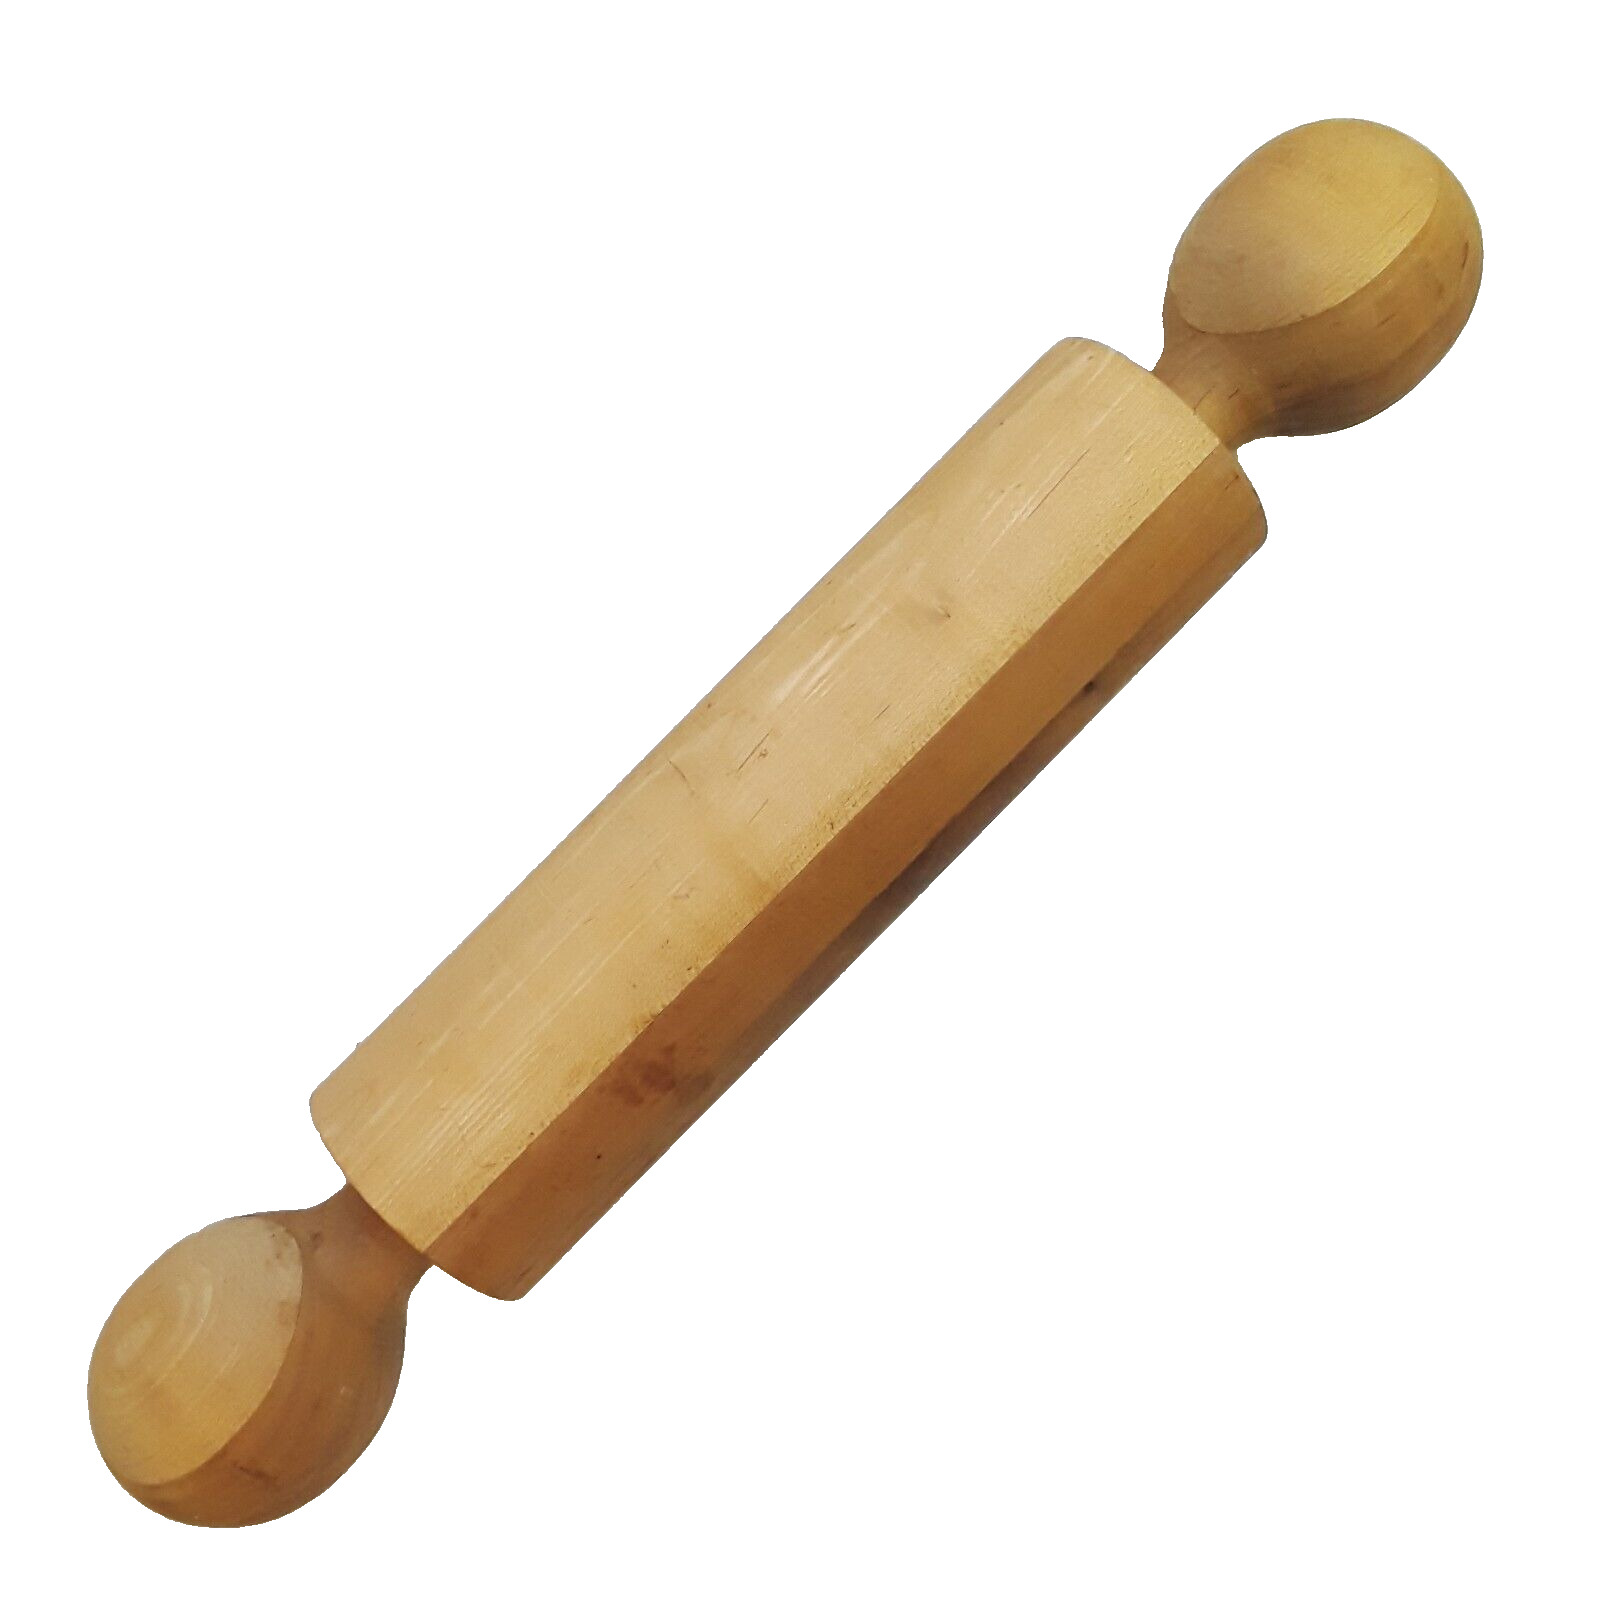 Big Fat Wood Rolling Pin with Large Bulbous Ball Handles Hand Crafted Hardwood